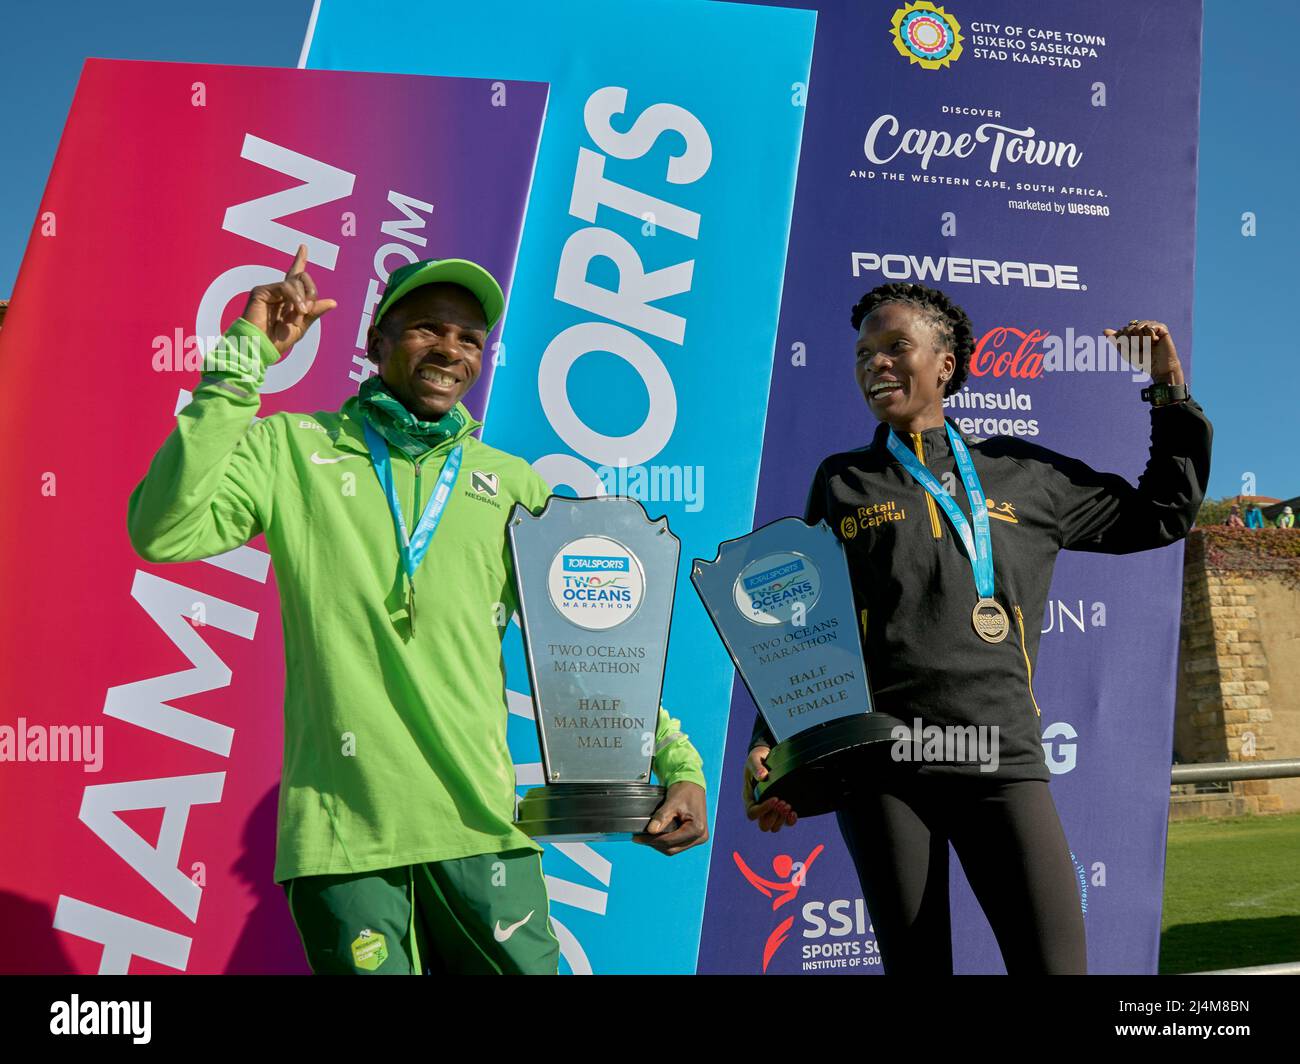 Cape Town, South Africa, 20220416, Moses Tarakinyu (L) and Fortunate Chidzivo (R), Mens and Ladies Winners at awards ceremony MO Bassa/Alamay Live News Stock Photo